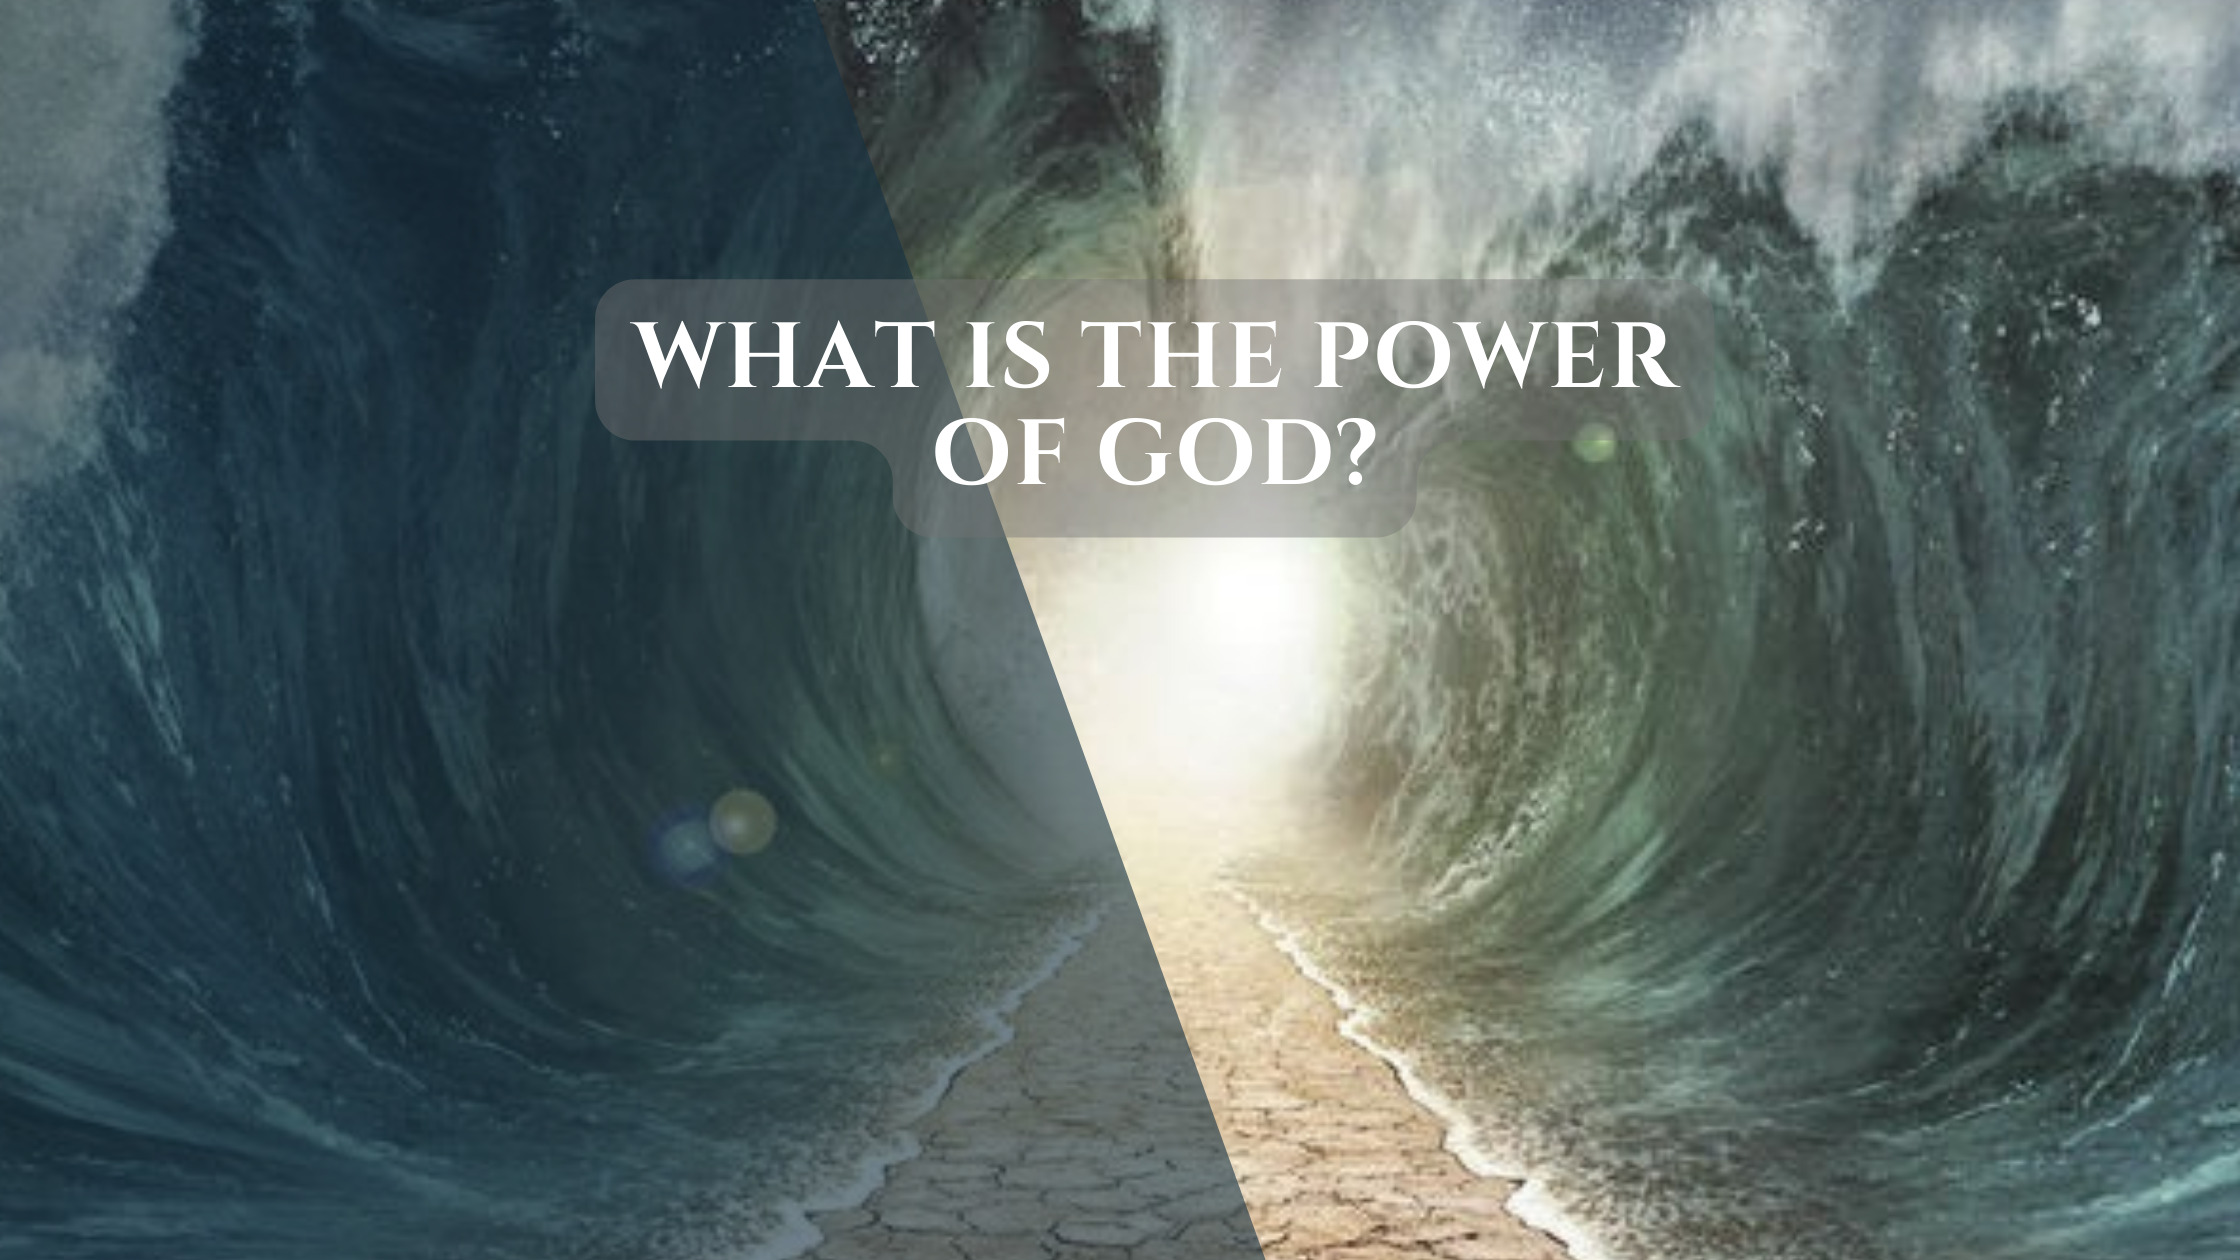 the power of God